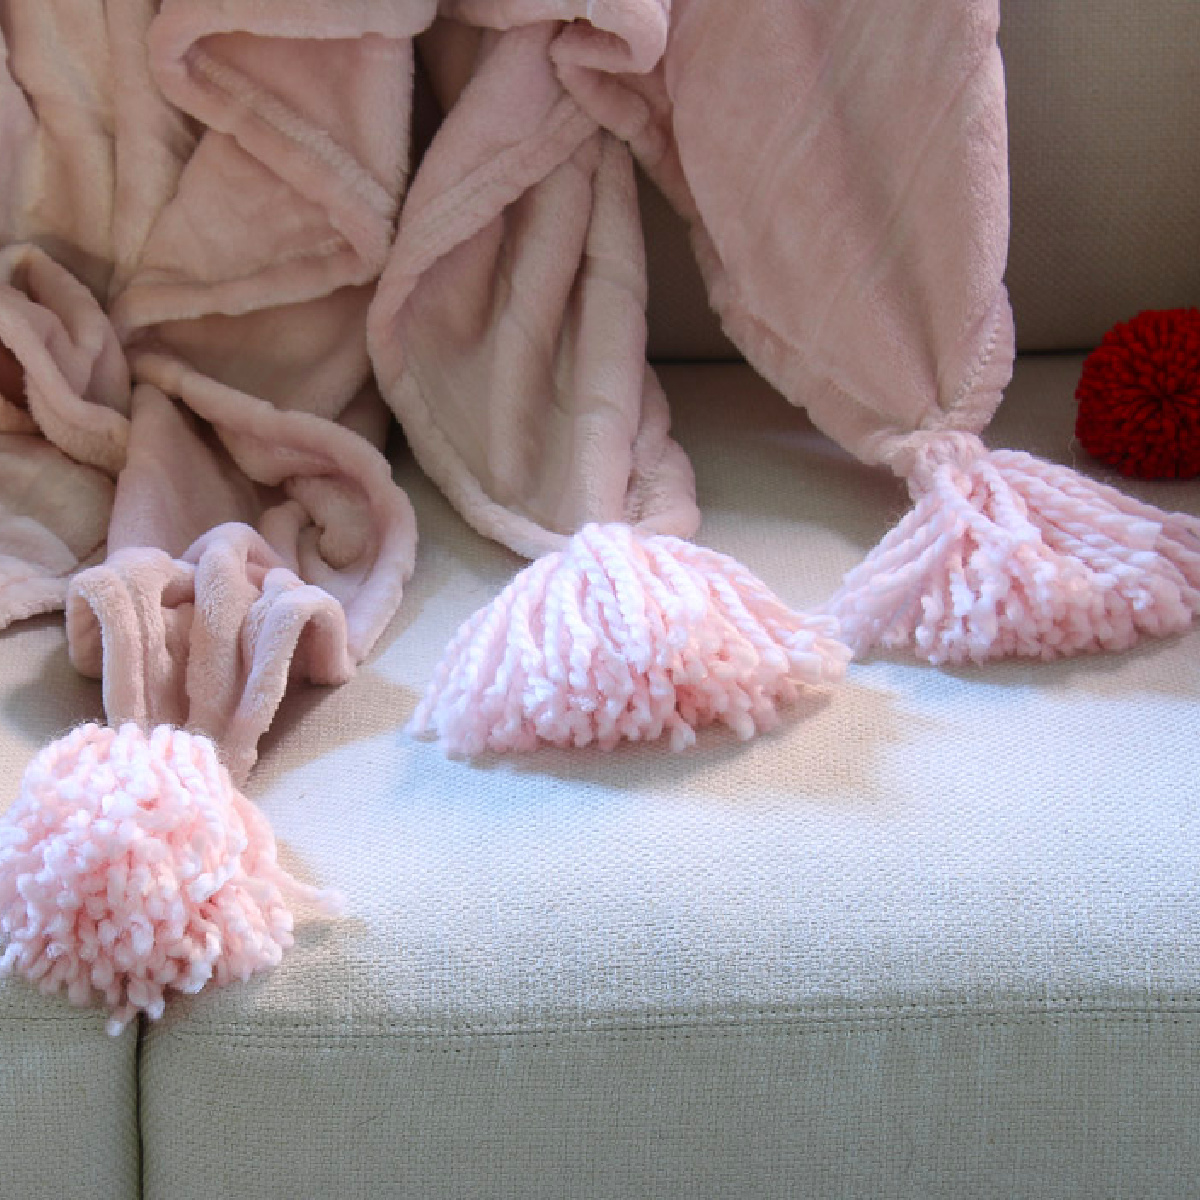 How to Make Tassels to Dress Up a Throw - Bluesky at Home